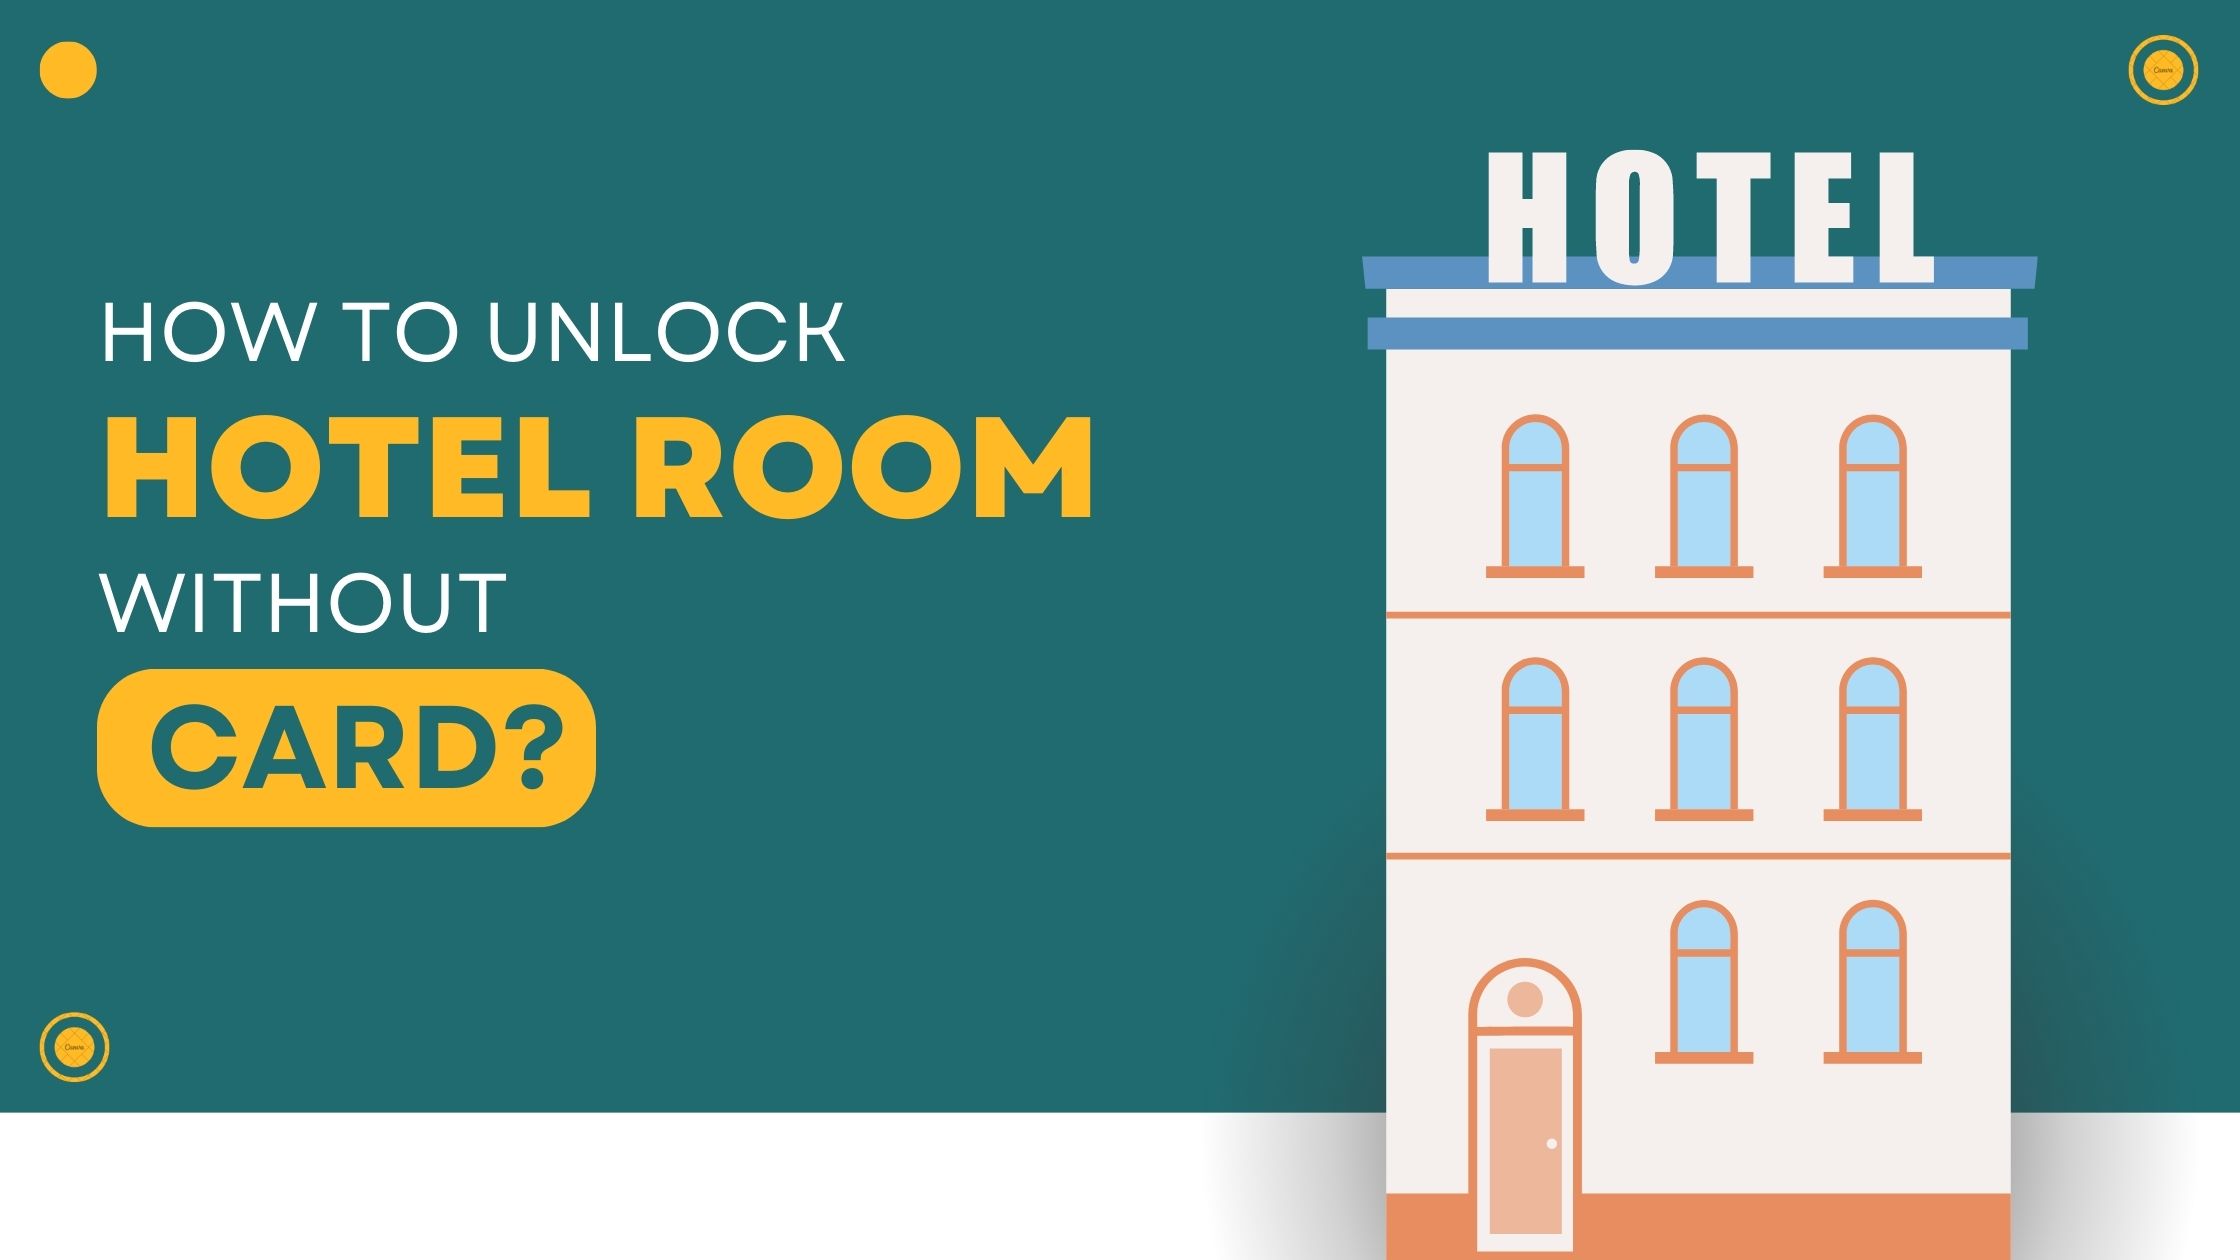 How To Unlock Hotel Room Without Card